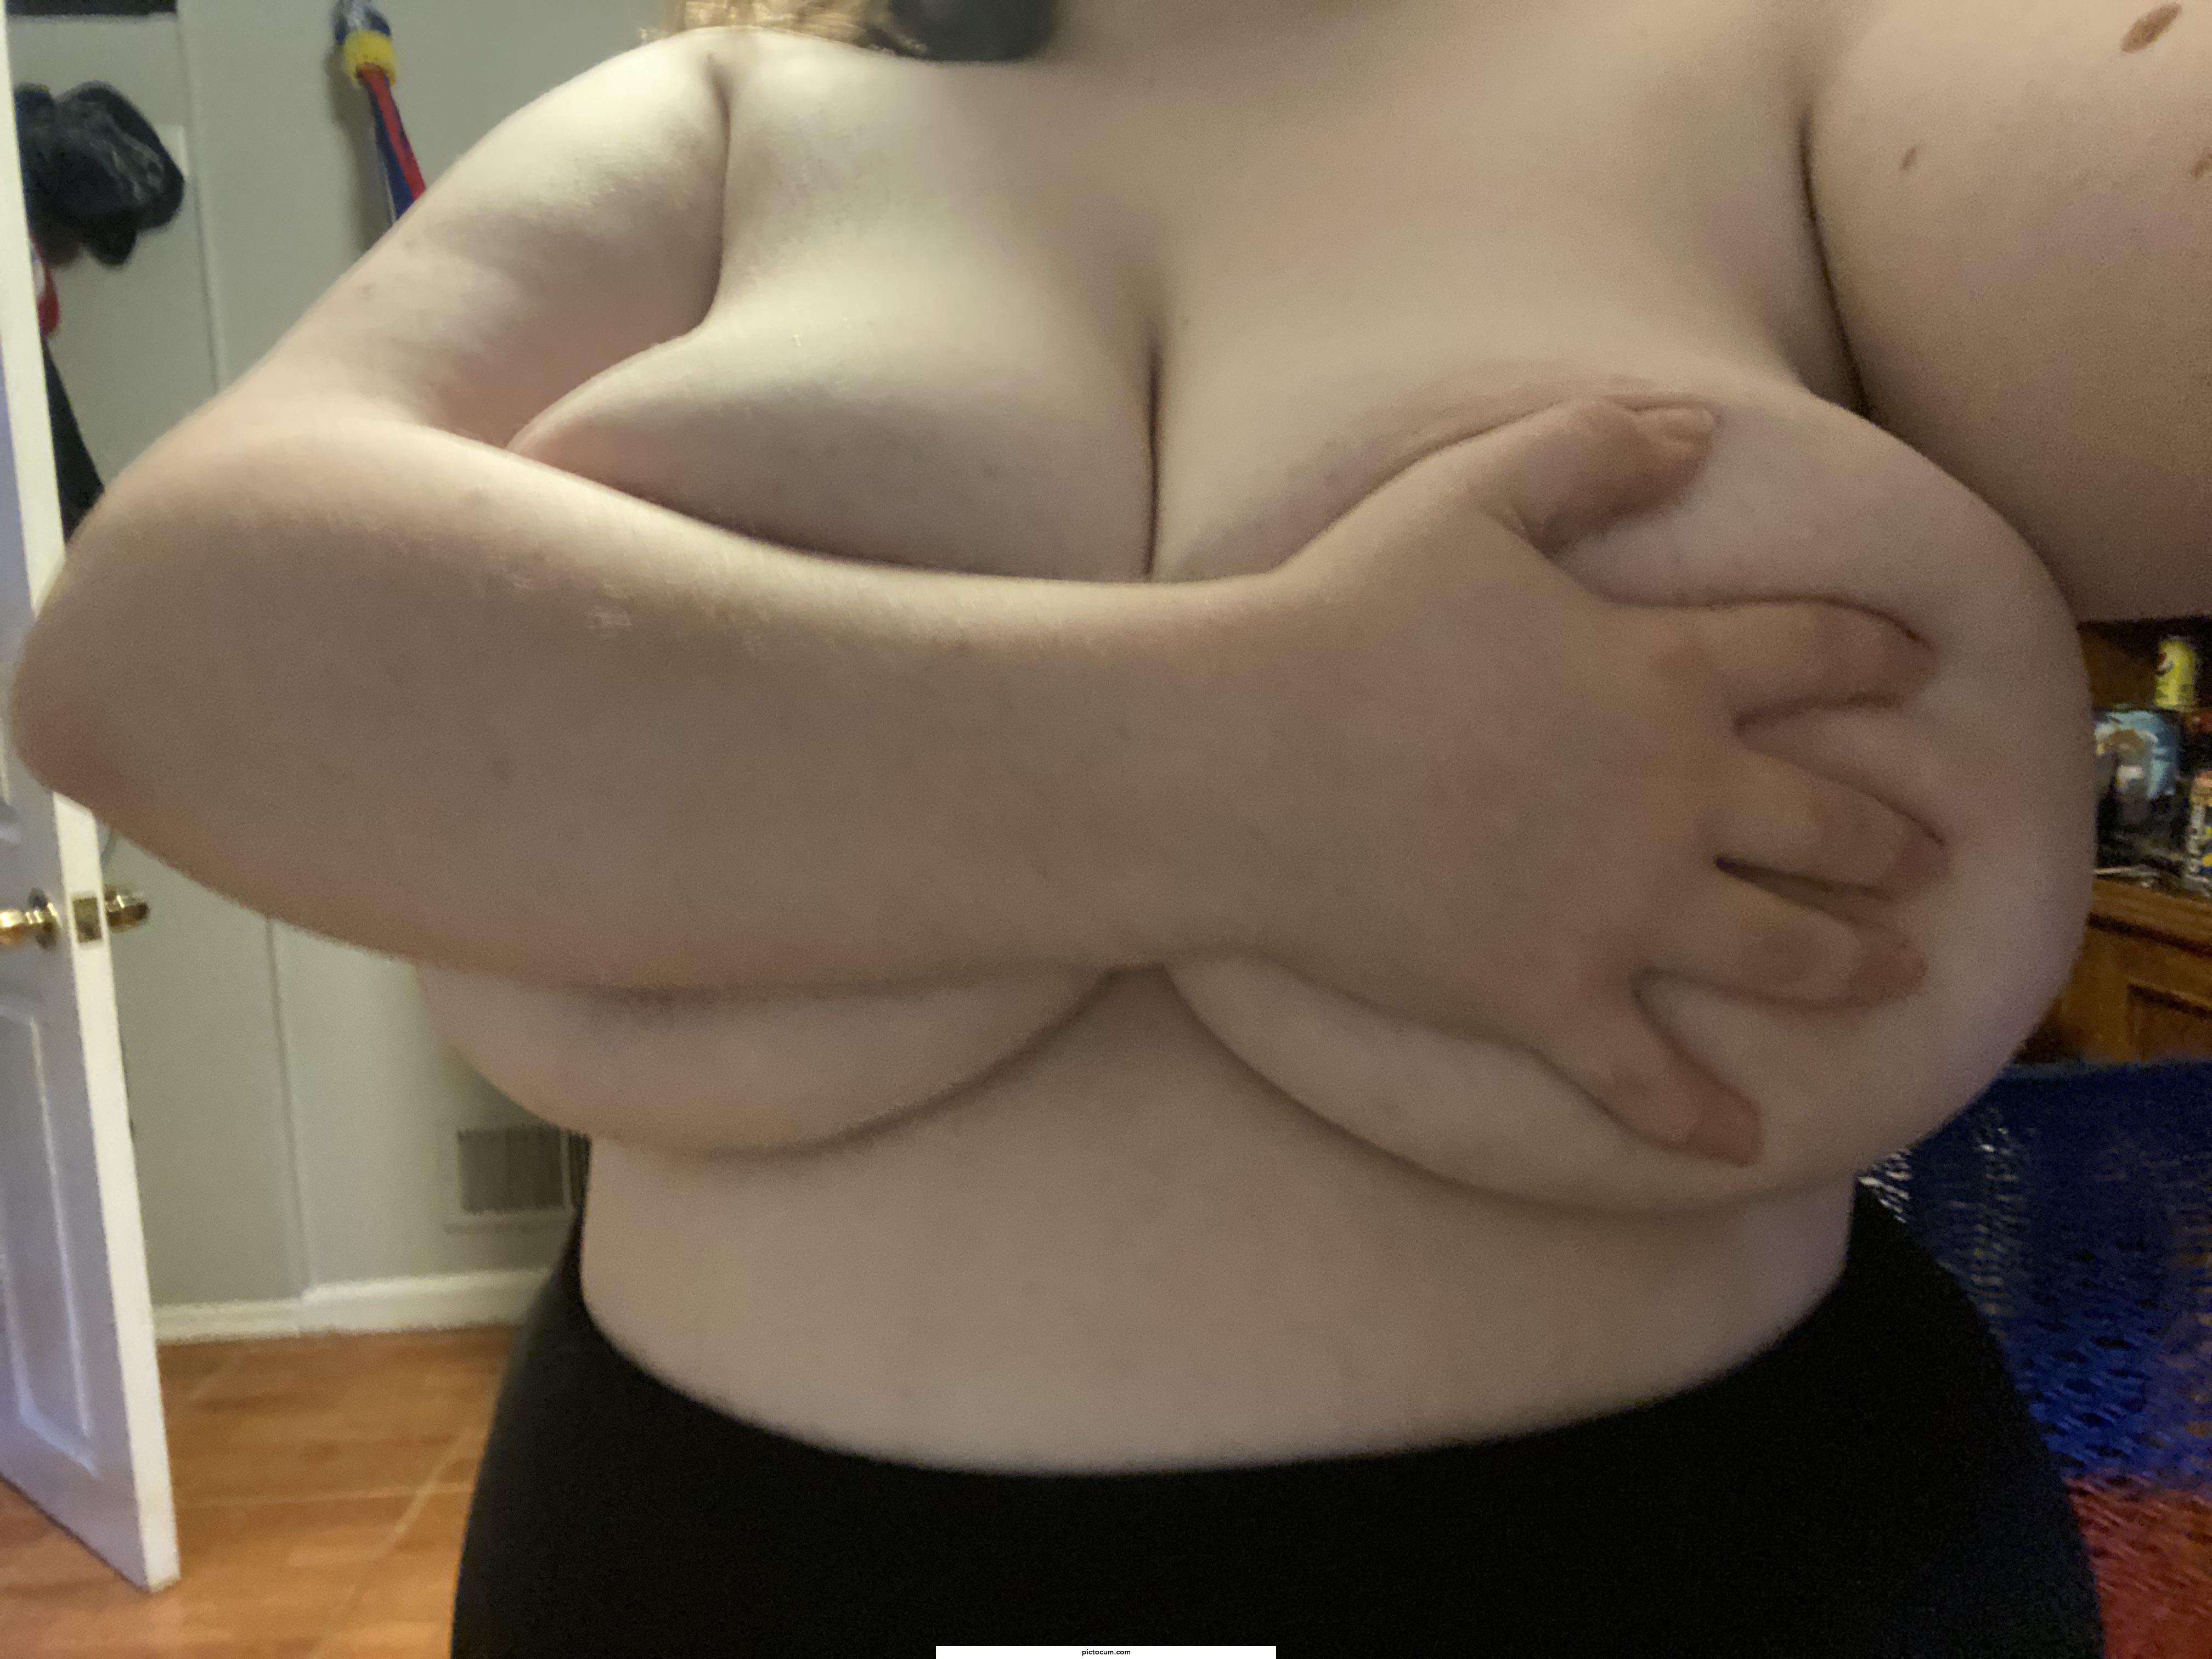 Very Active Seller Selling sessions, 10 dollar premade bundles, rates, and customs. Pay to play cash app only -SBBW SELLER- Kik: Jazzyxoo Twitter: Asellernamedjaz